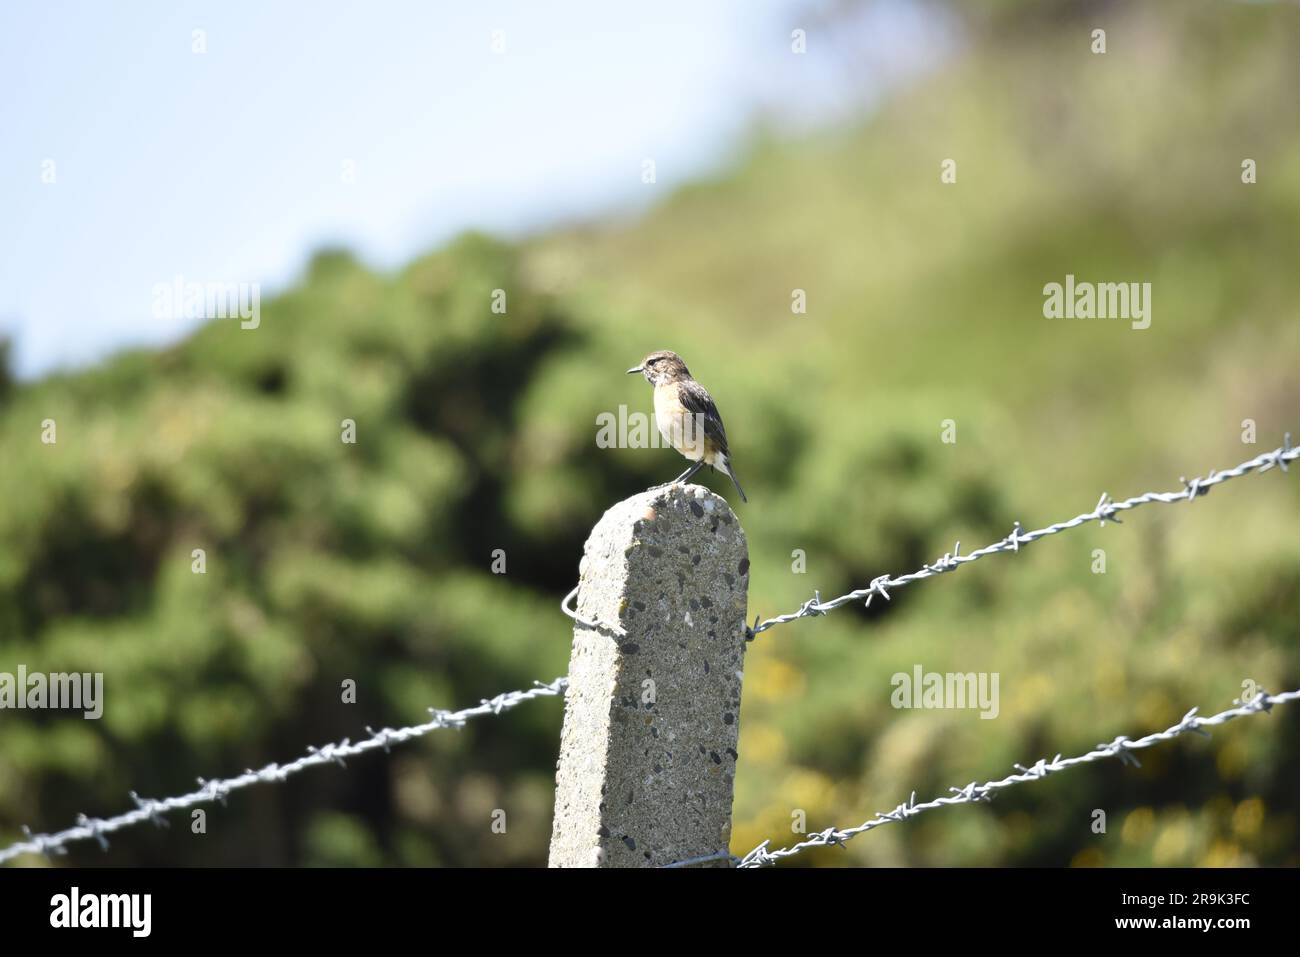 Female Eurasian Stonechat (Saxicola torquata) Perched on Top of a Stone Fence Post, against a Scrub Background, taken in June on the Isle of Man, UK Stock Photo